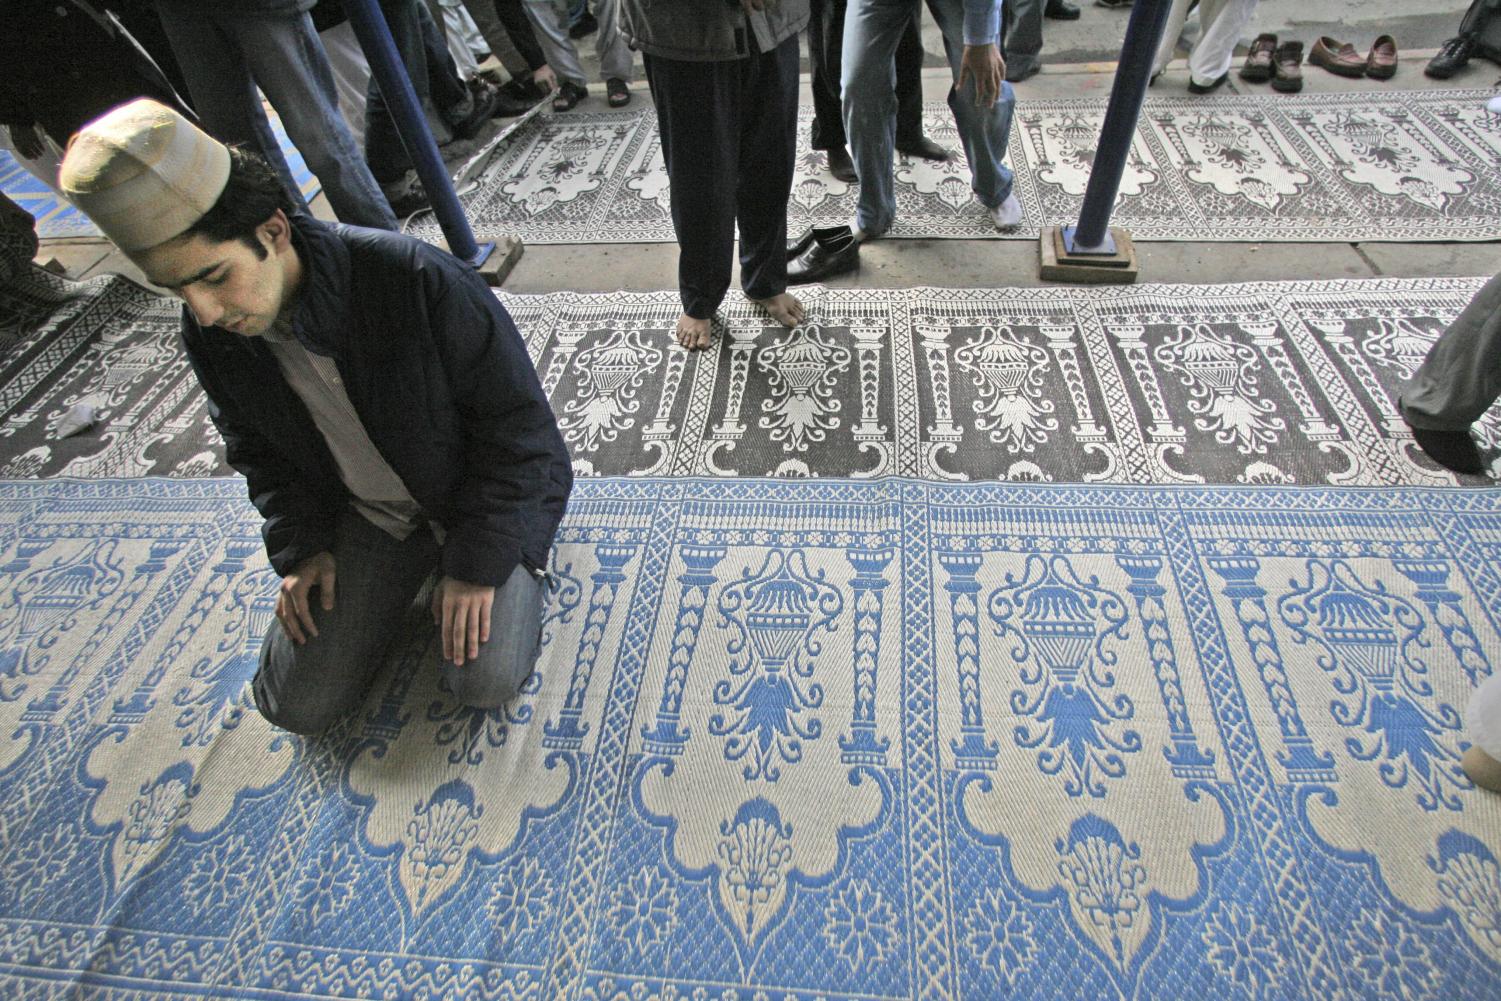 A man prays outside the Makki mosque during a prayer service for assassinated former Prime Minister Benazir Bhutto Friday, Dec. 28, 2007, in the Brooklyn borough of New York. Bhutto was assassinated Thursday in Rawalpindi, Pakistan, by an attacker who shot her after a campaign rally and then blew himself up. (AP Photo)